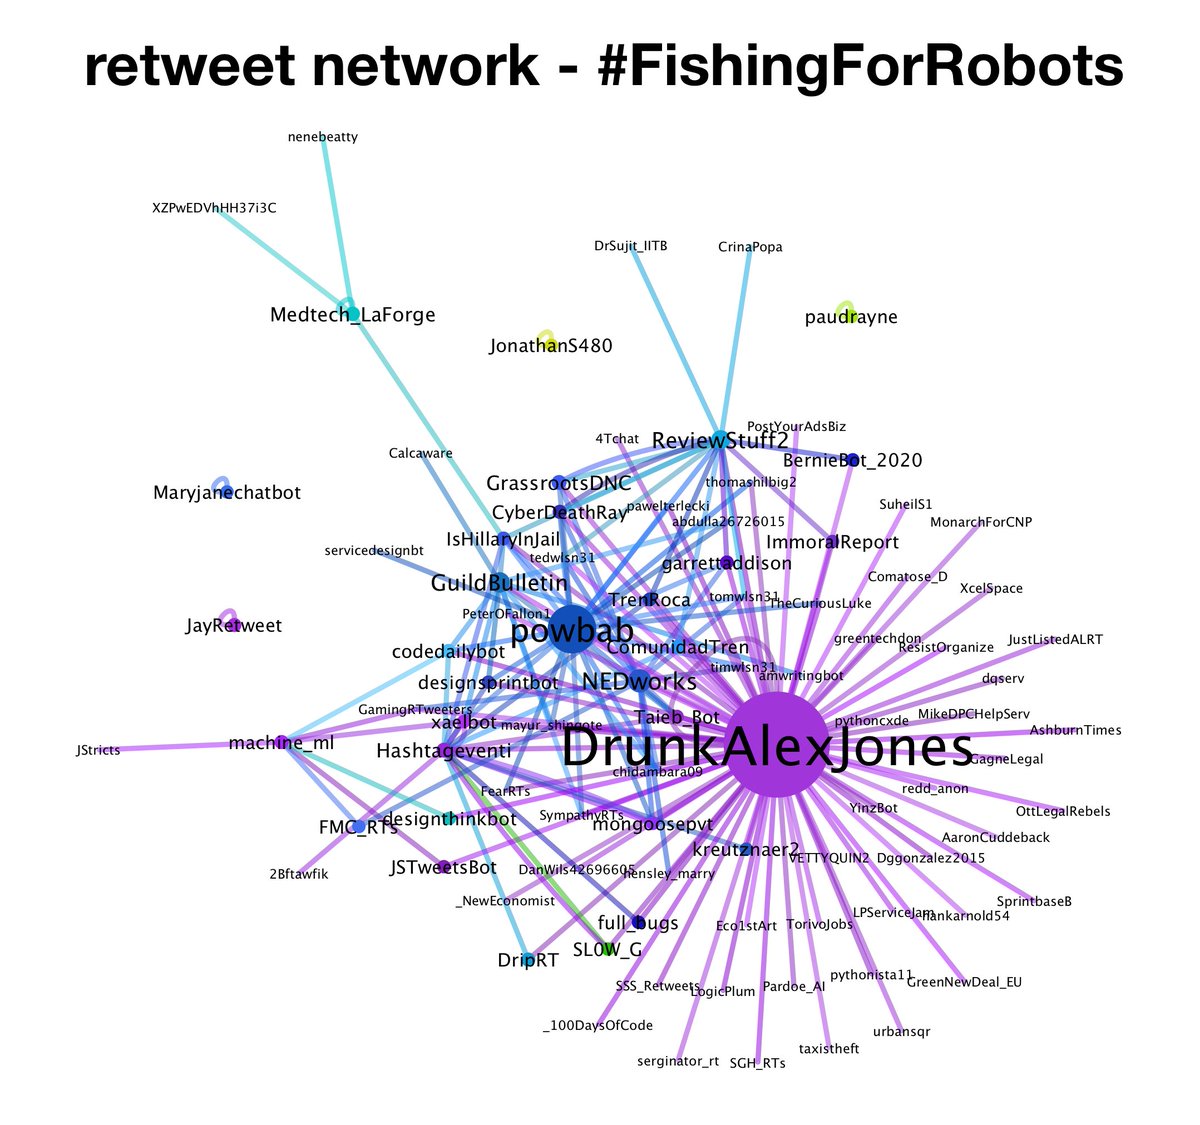 On January 13th, 2020, shortly before midnight Pacific time, our good friend  @DrunkAlexJones debuted the hashtag  #FishingForRobots in order to, well, fish for robots.  #ThursdayThoughts  #ManyFishBitecc:  @ZellaQuixote